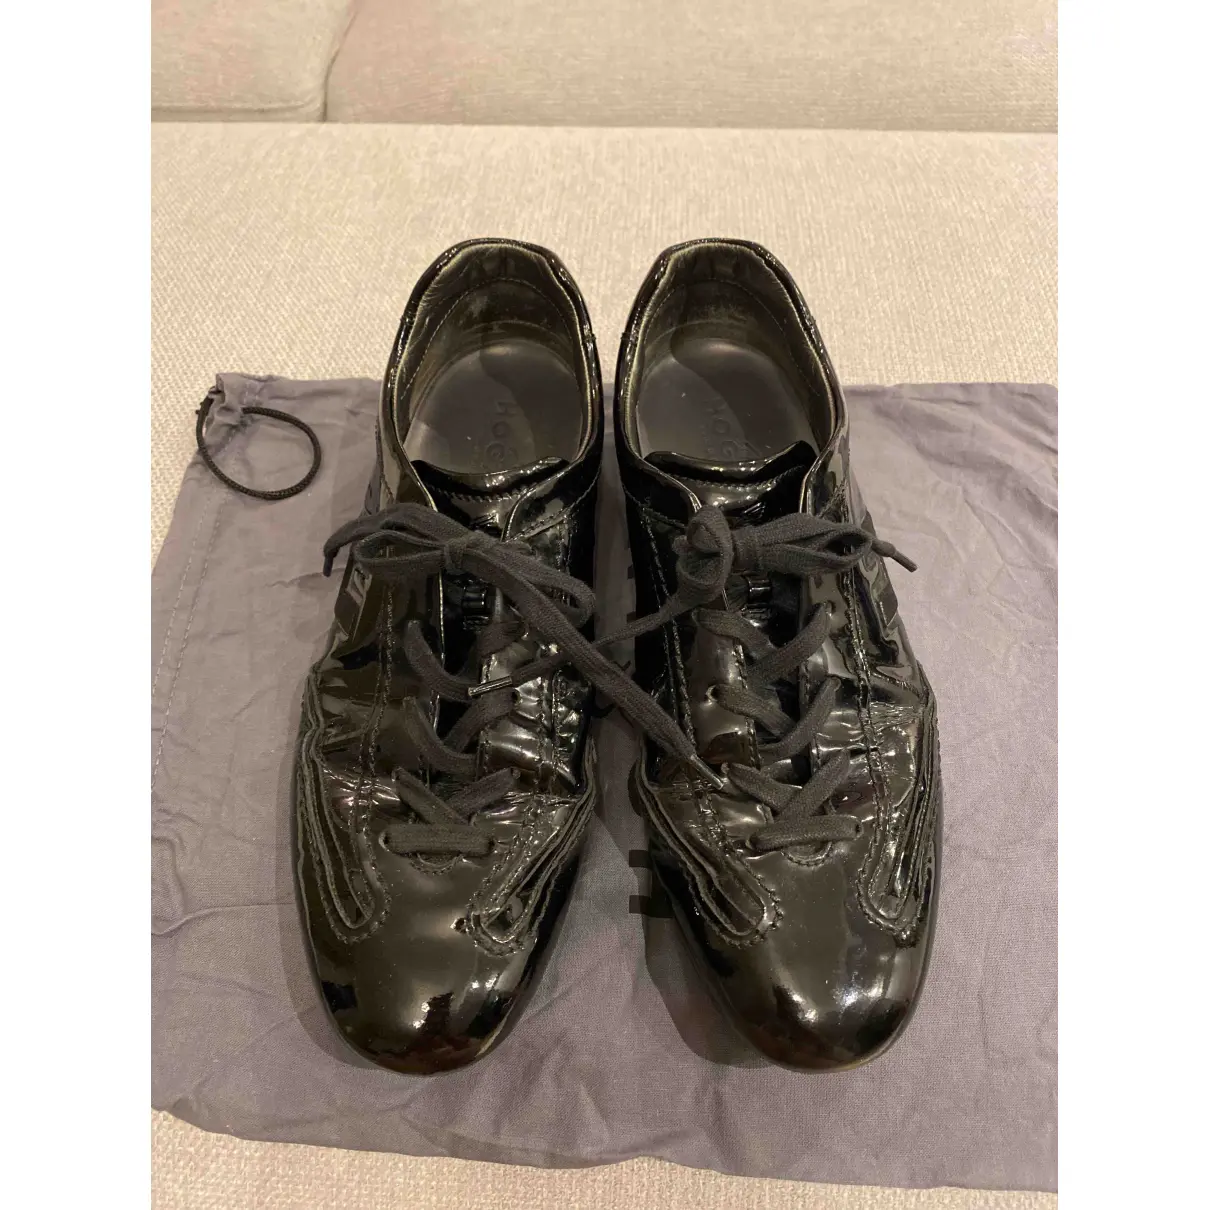 Buy Hogan Patent leather trainers online